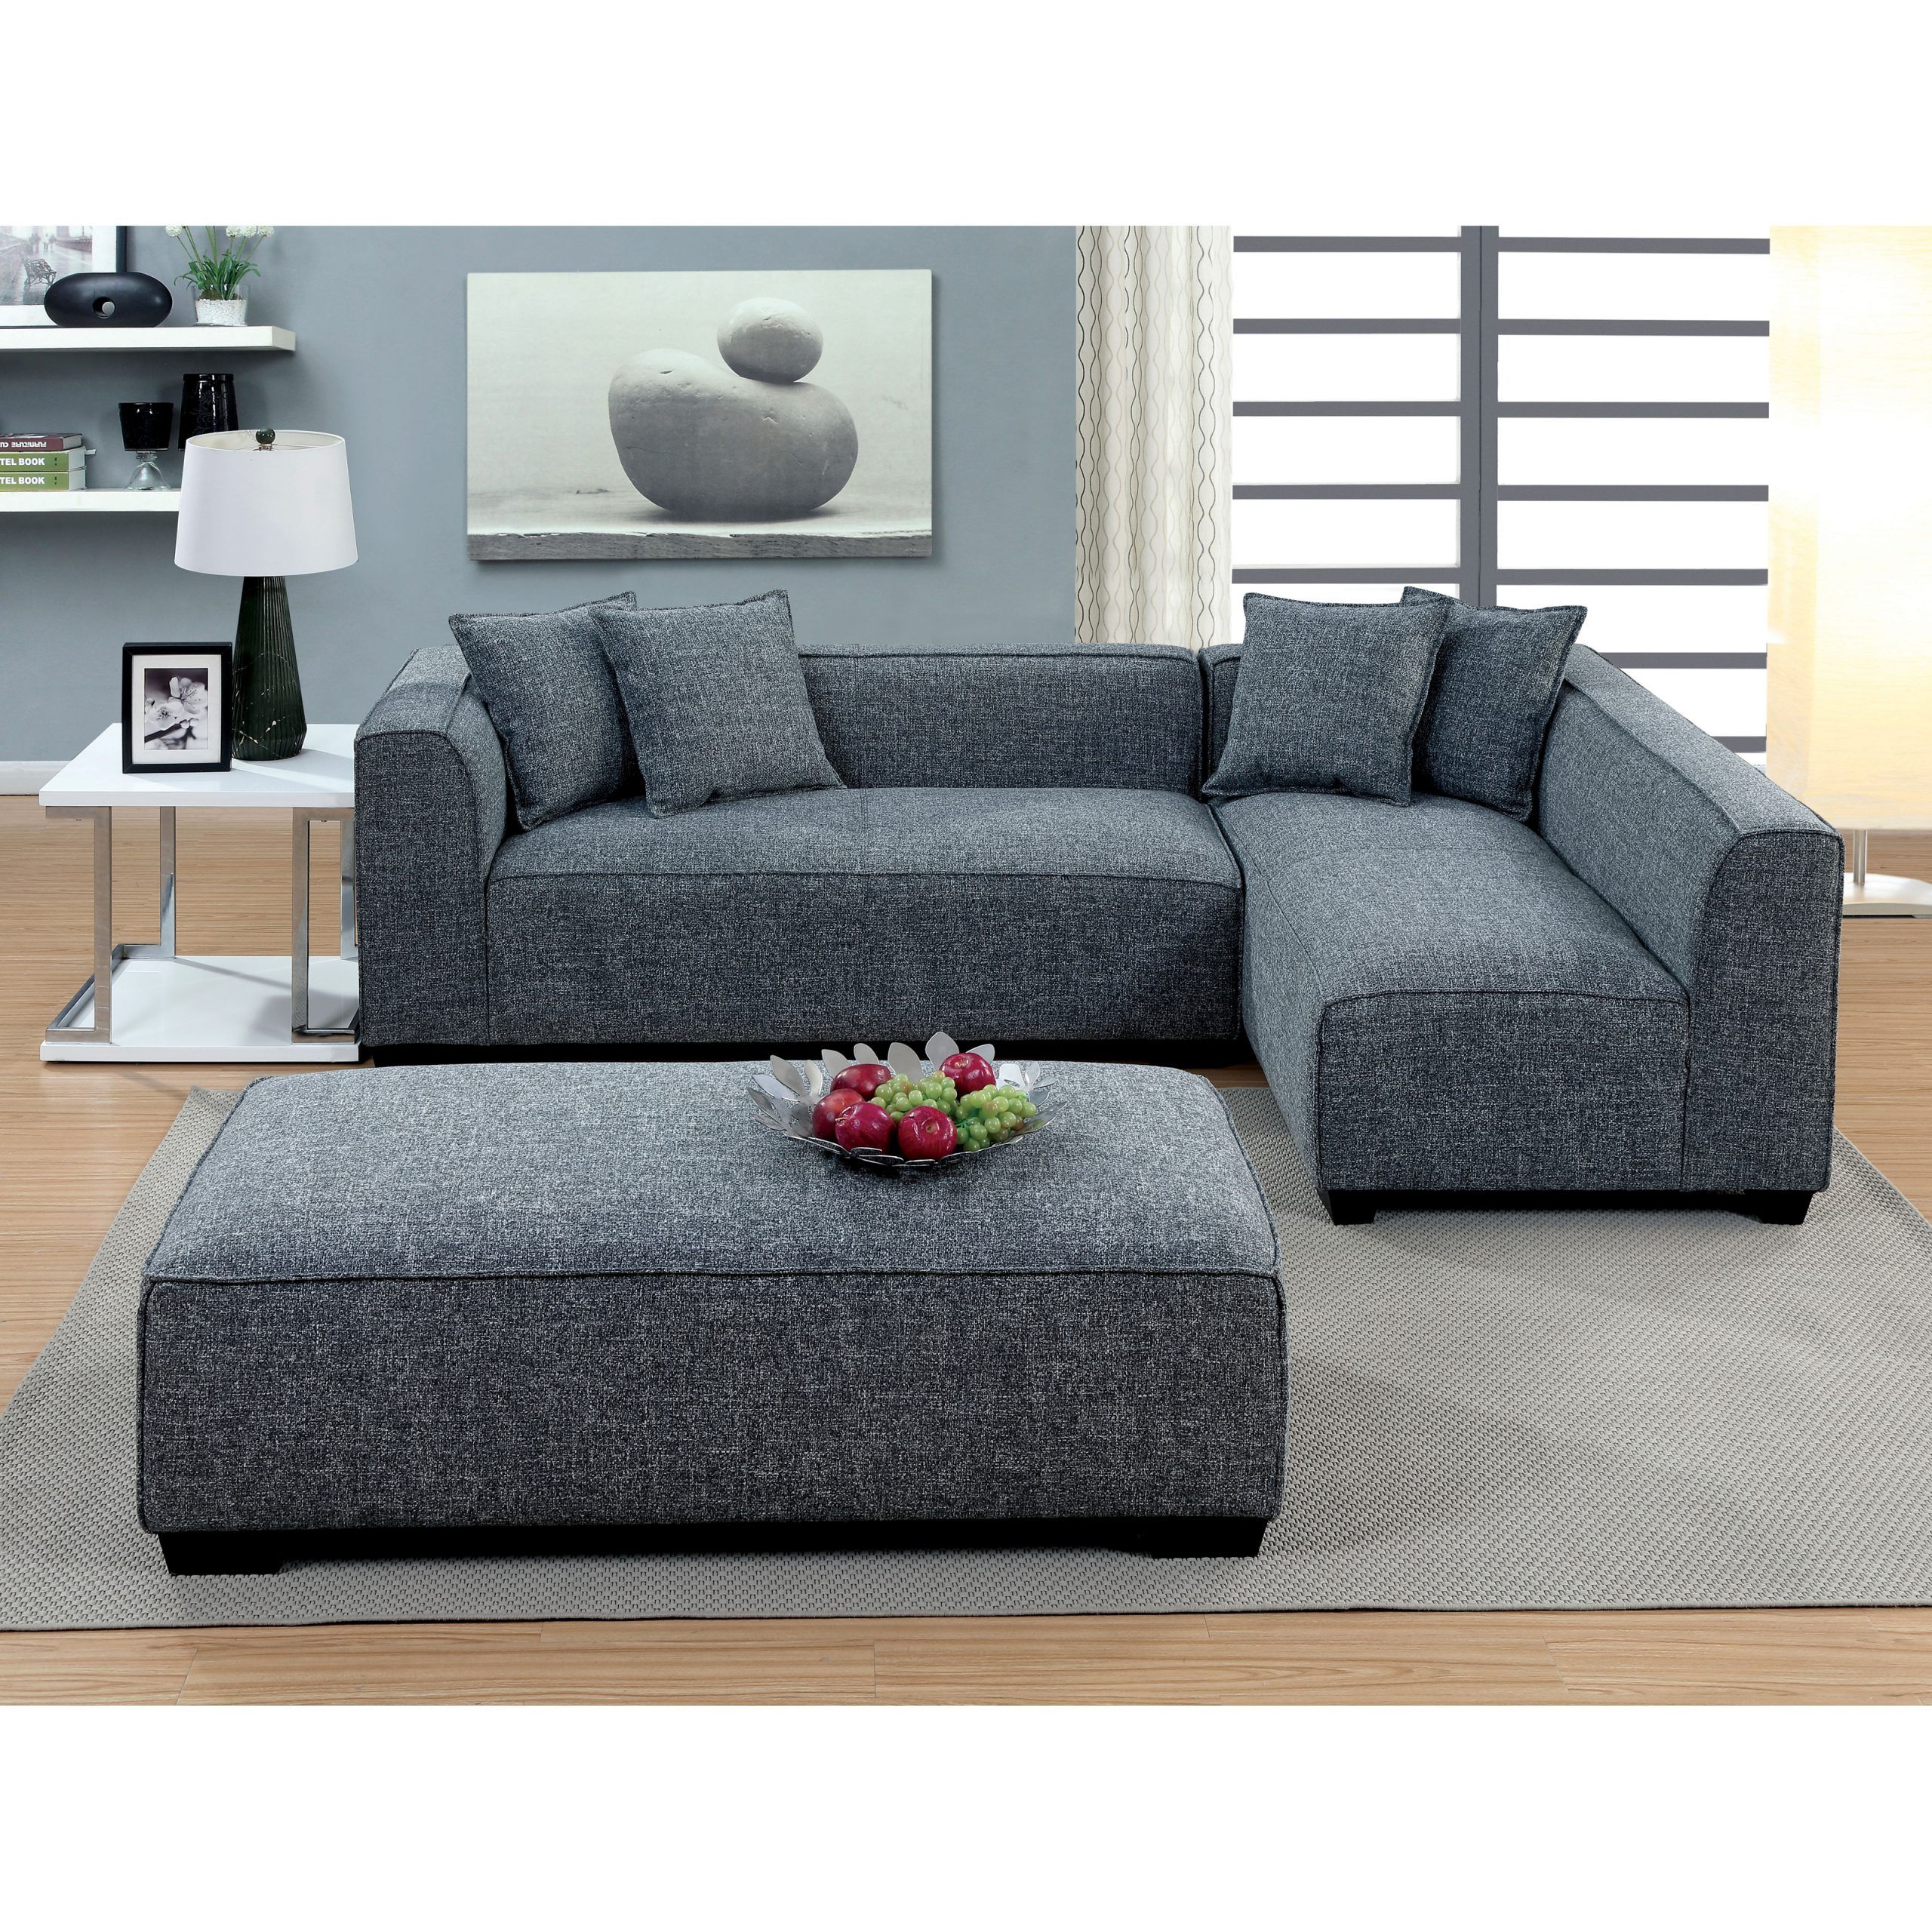 Plush Sectional Sofa Furniture Of America Misha Within 2pc Luxurious And Plush Corduroy Sectional Sofas Brown (View 1 of 15)